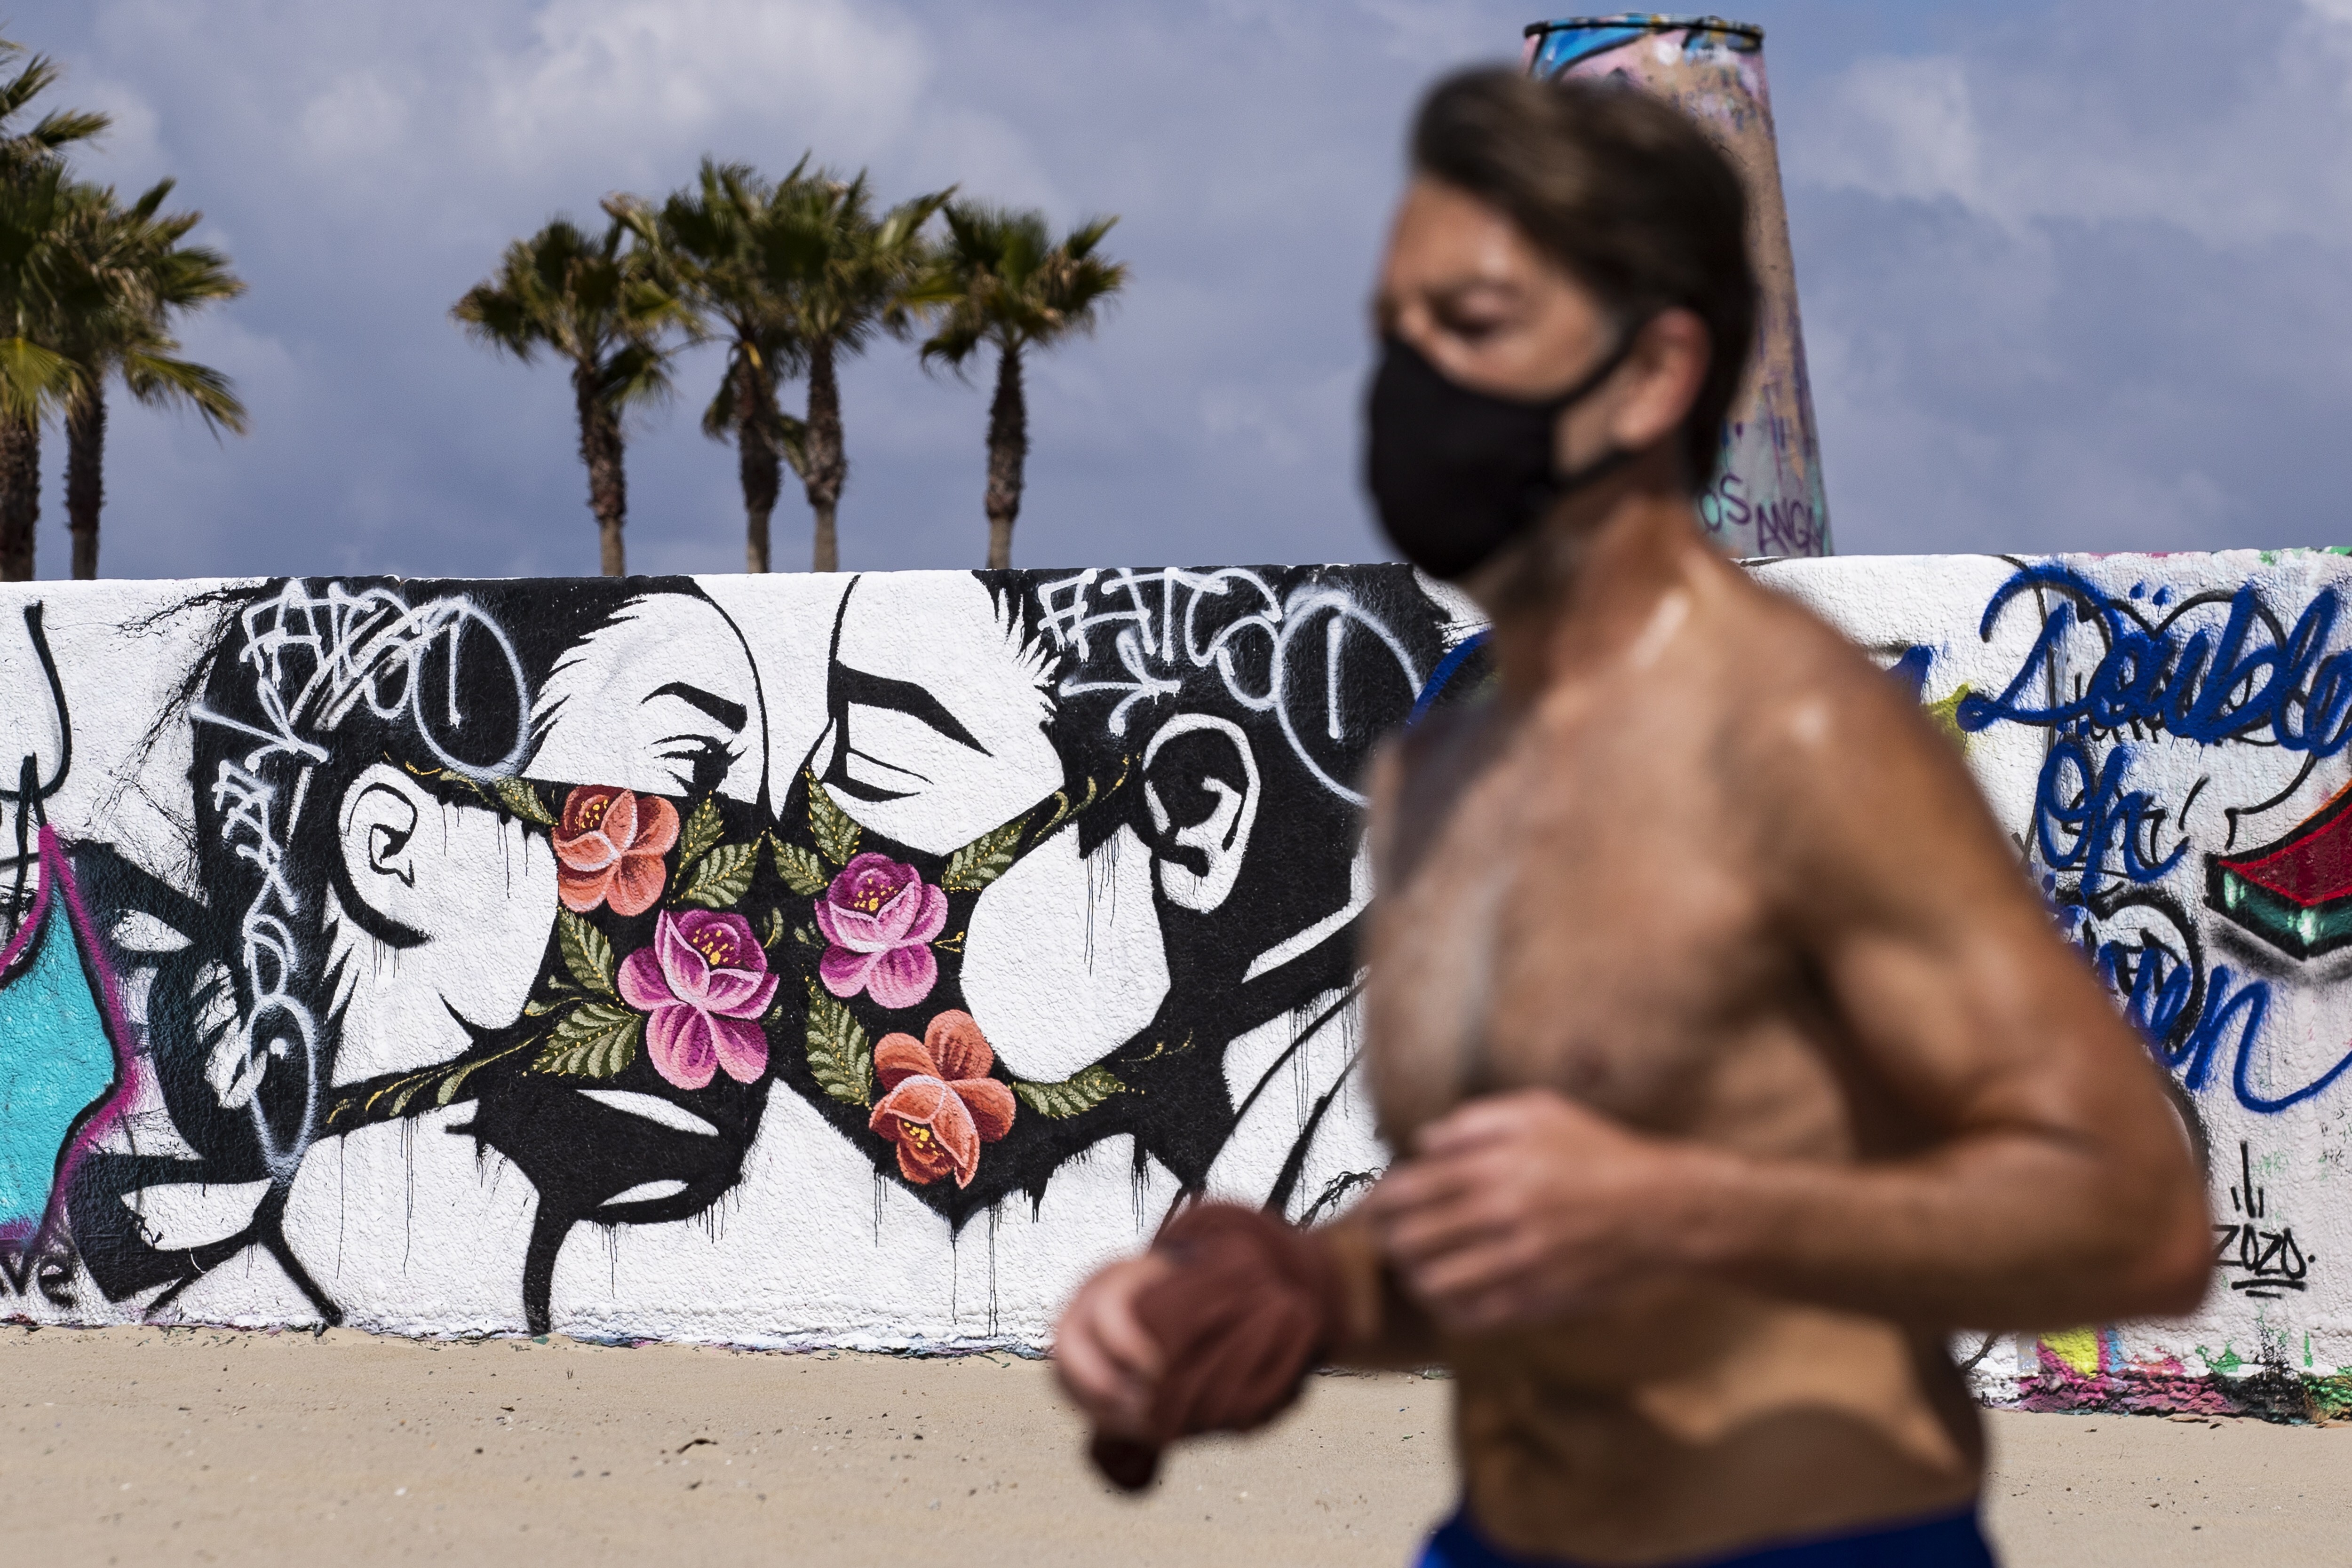 A runner in a face mask jogs past a mural in Venice, California, showing a masked couple kissing. Photo: EPA-EFE